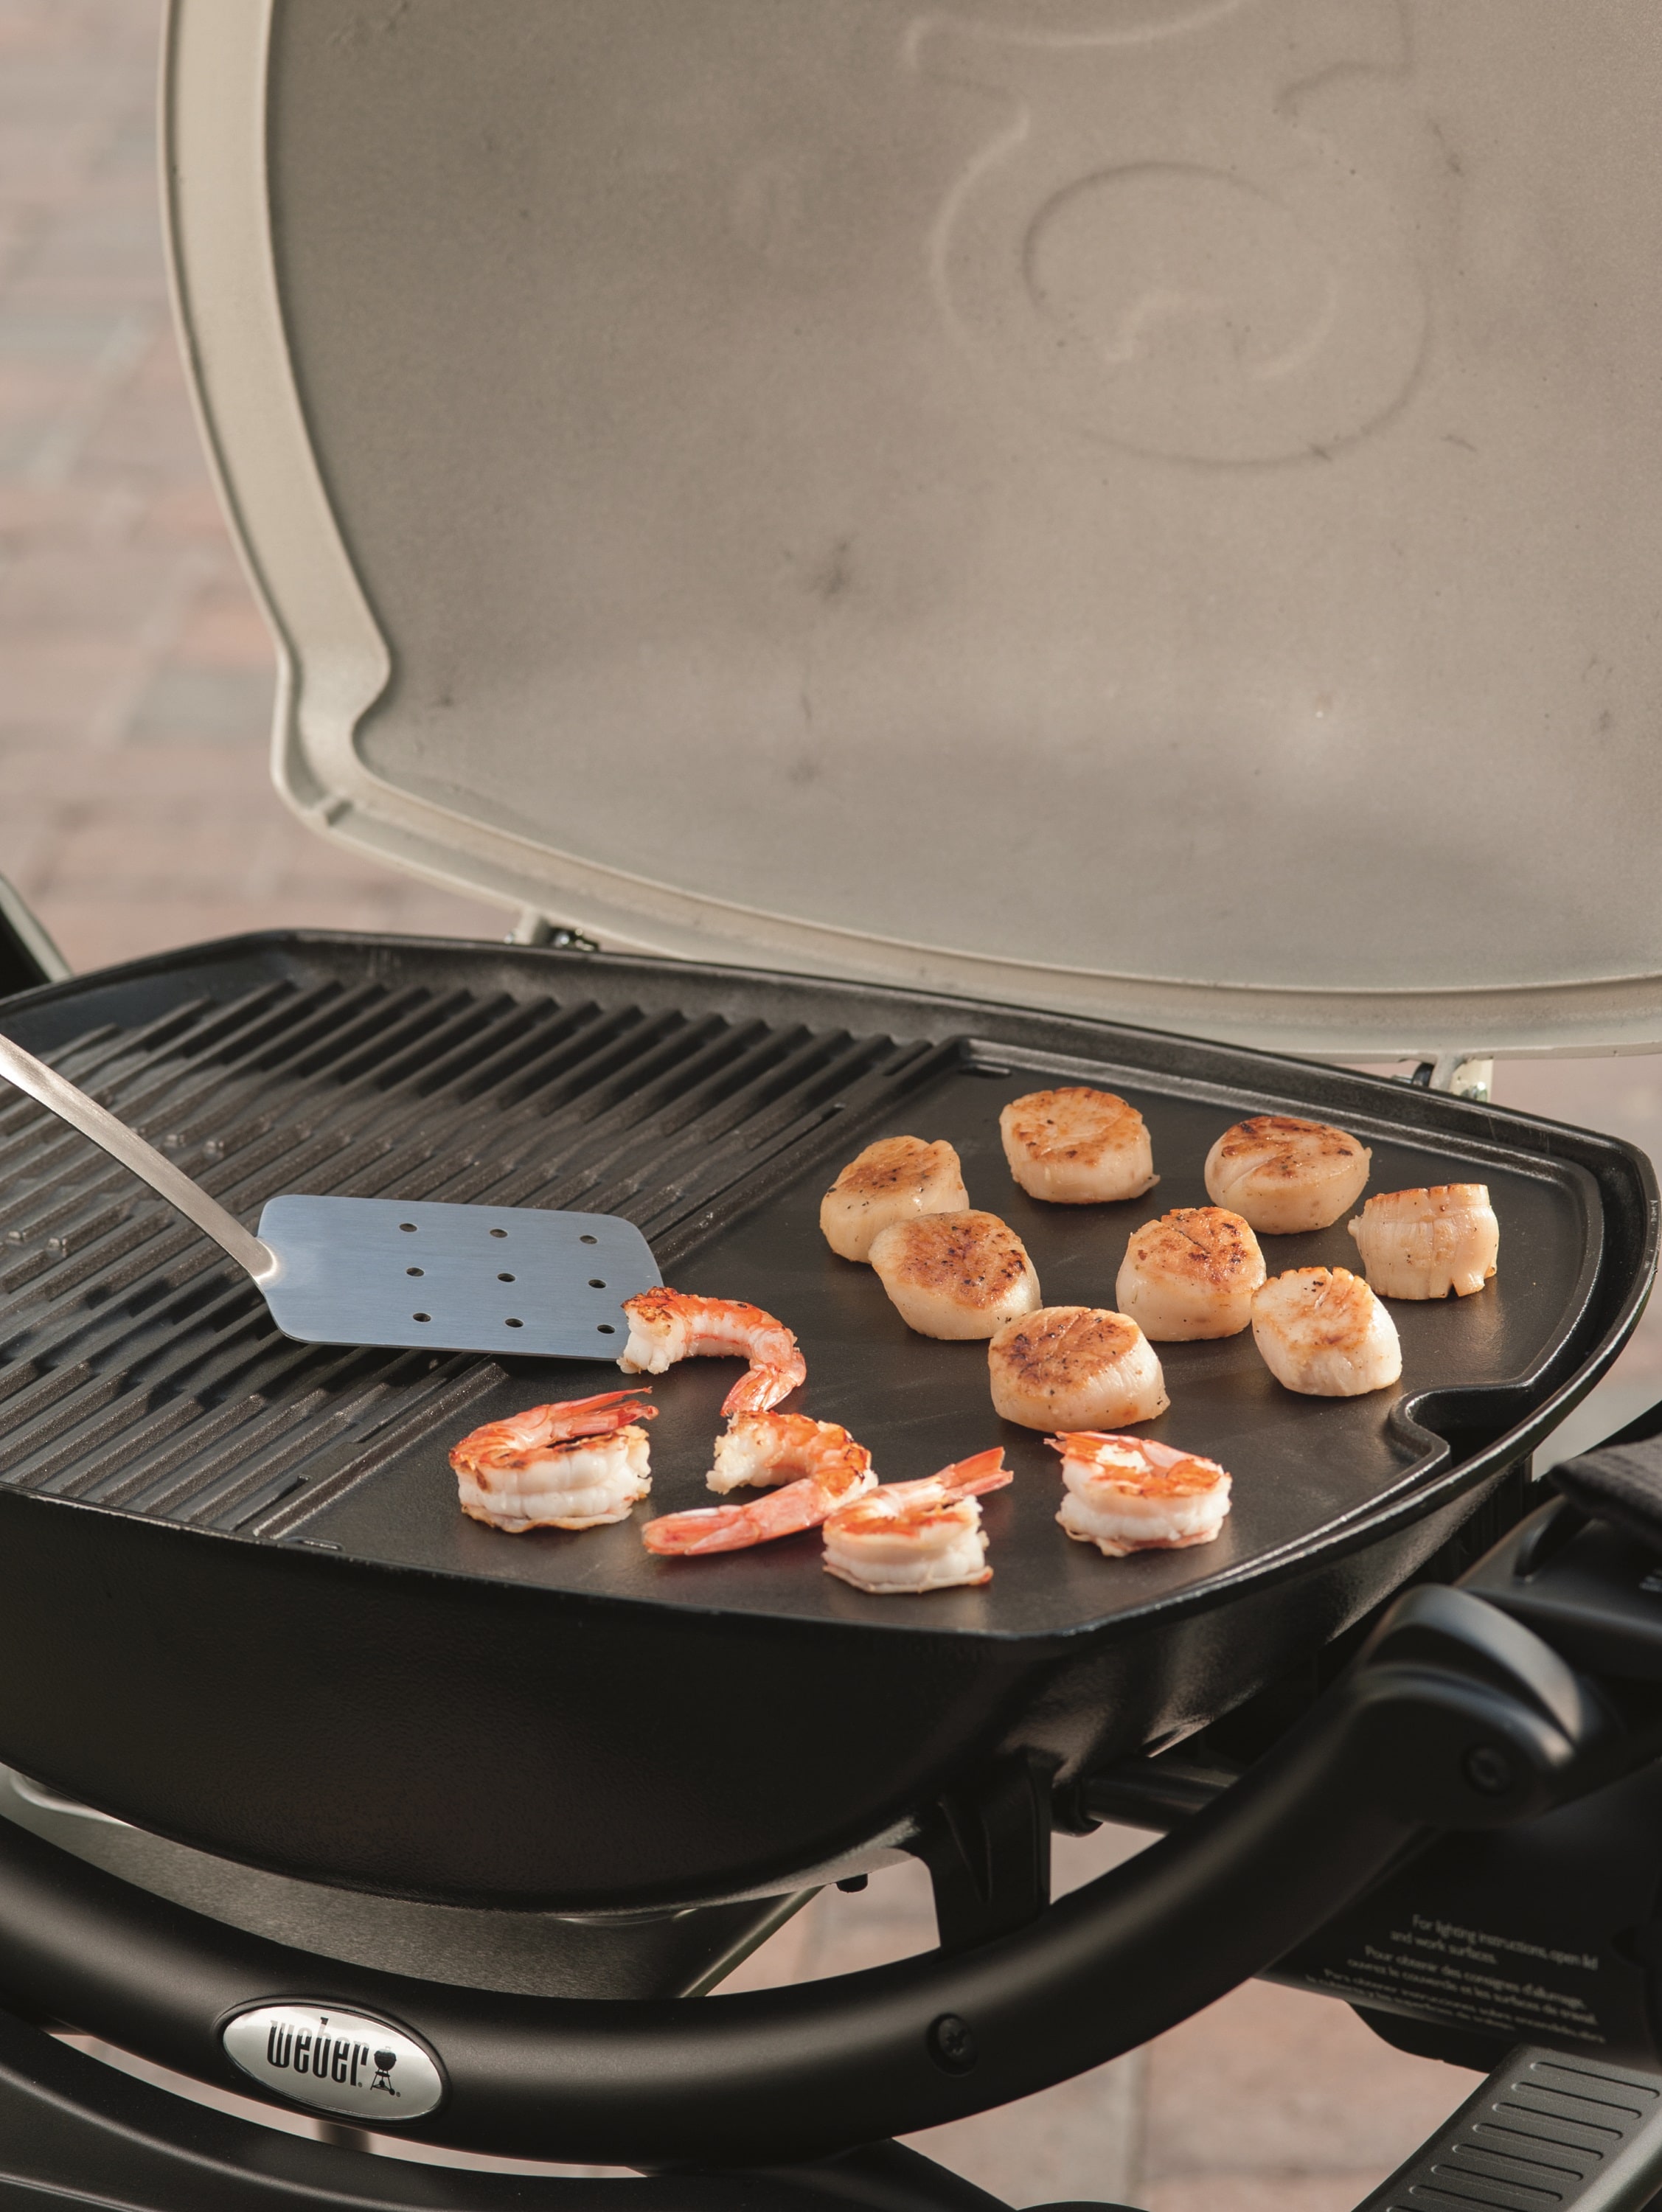 Weber Porcelain-Enameled Cast-Iron Non-Stick Griddle in the Grill